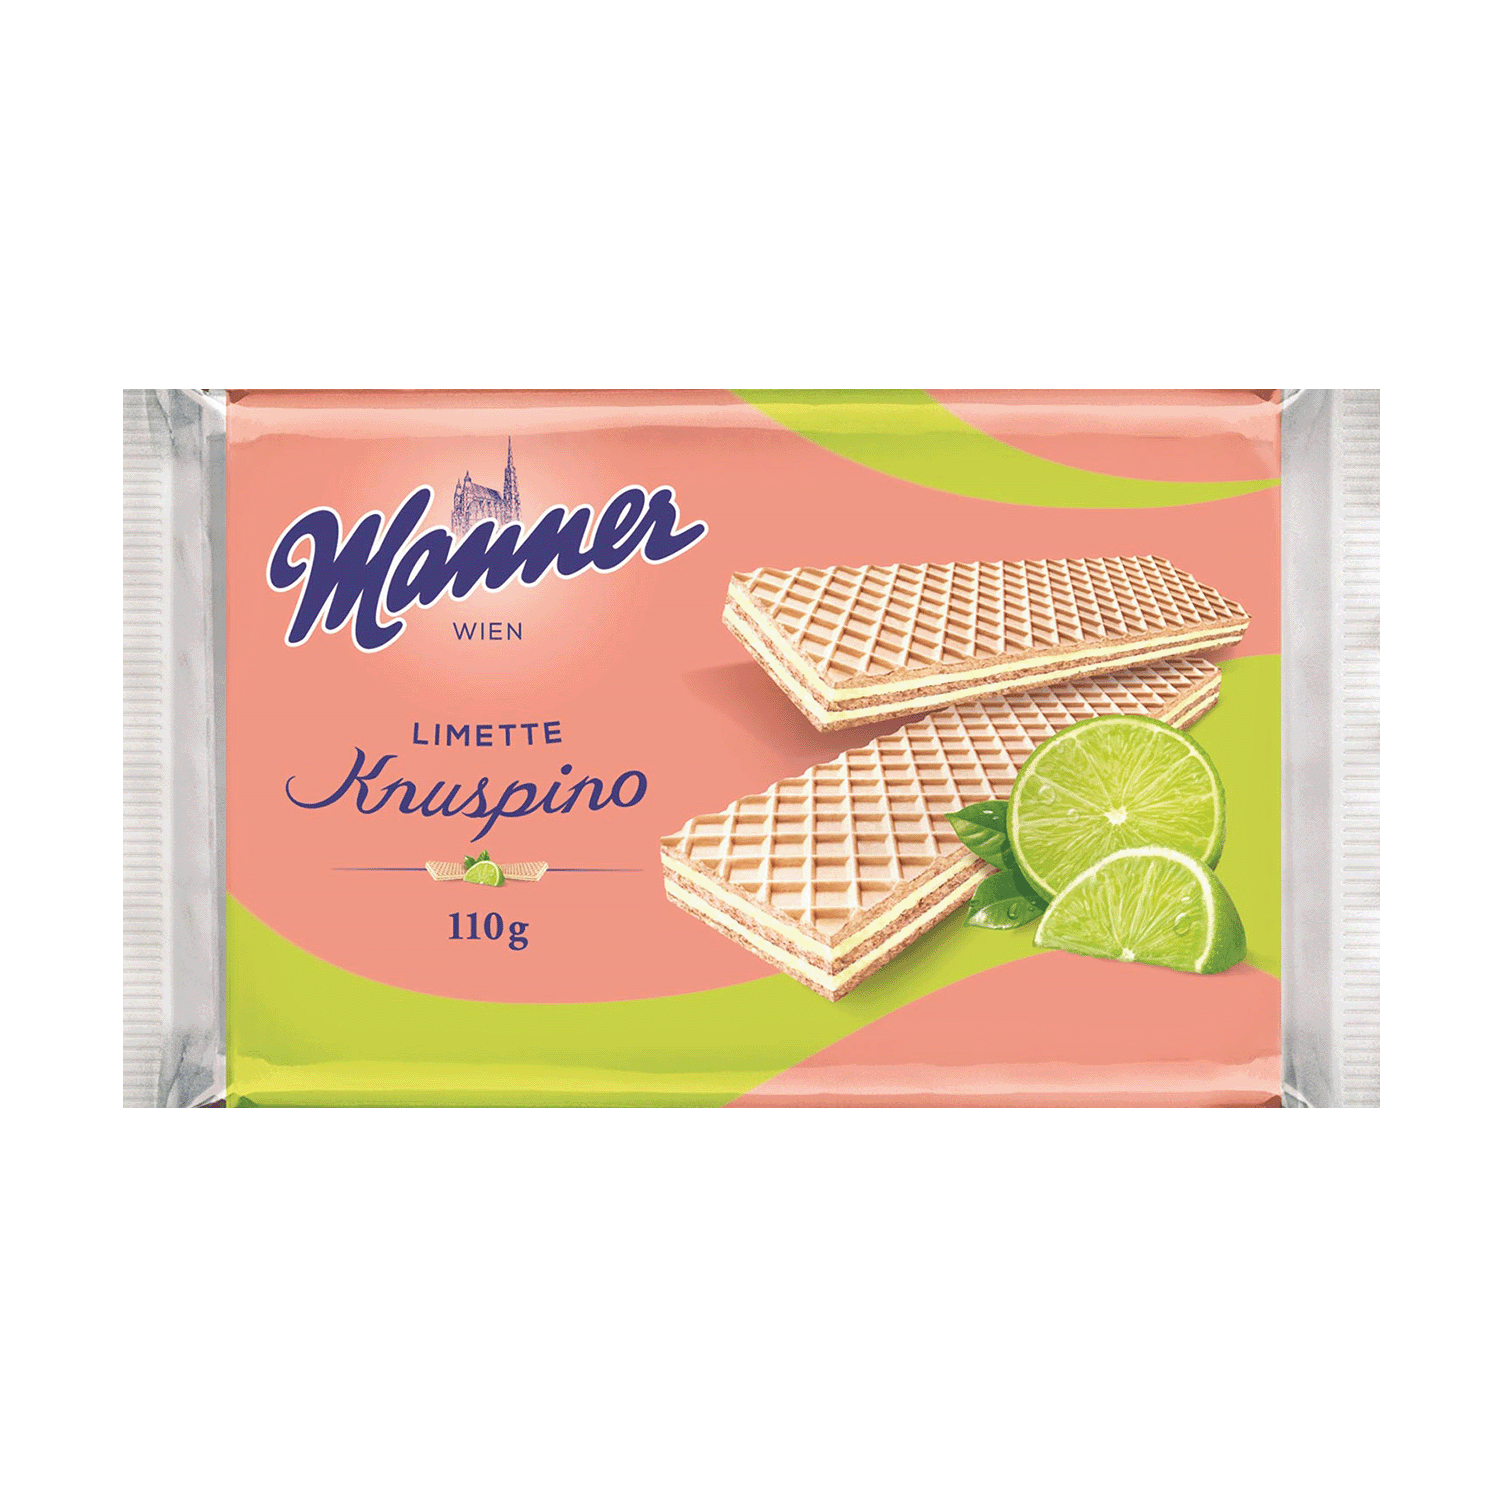 Knuspino Lime, 110g